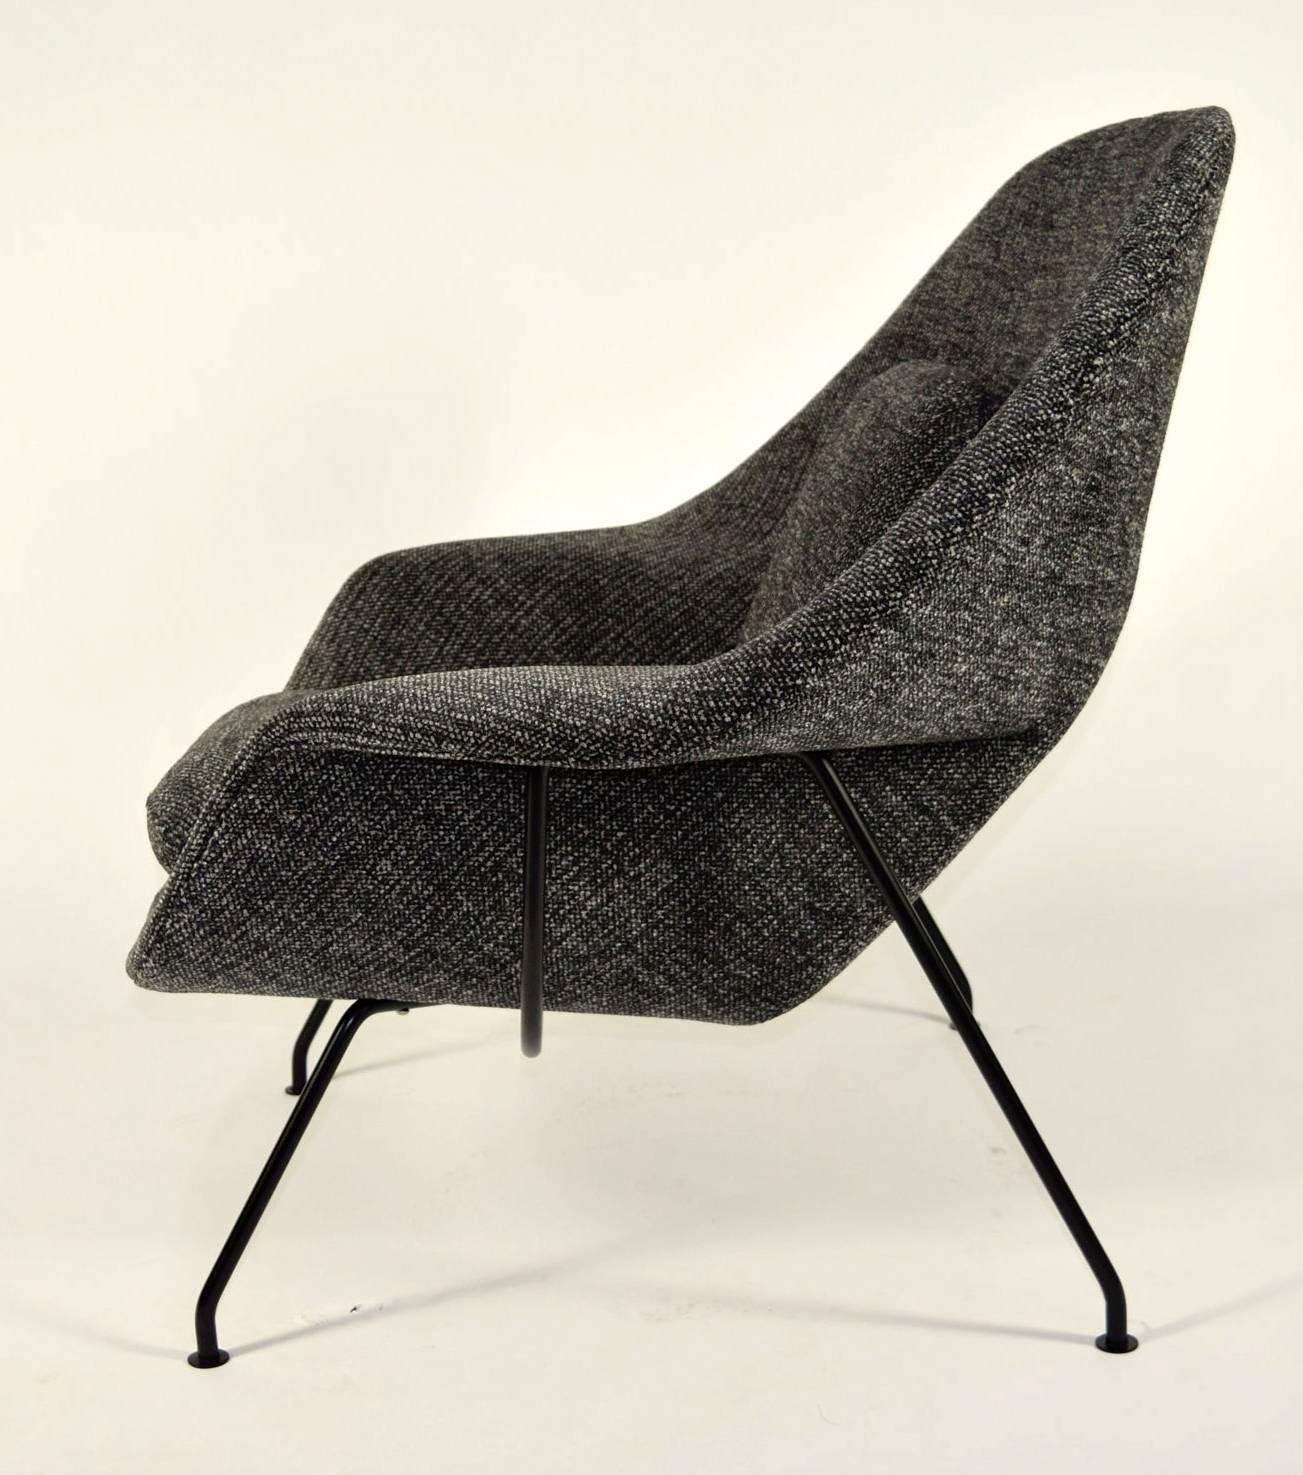 Mid-Century Modern Eero Saarinen Womb Chair for Knoll in Holly Hunt Great Outdoors